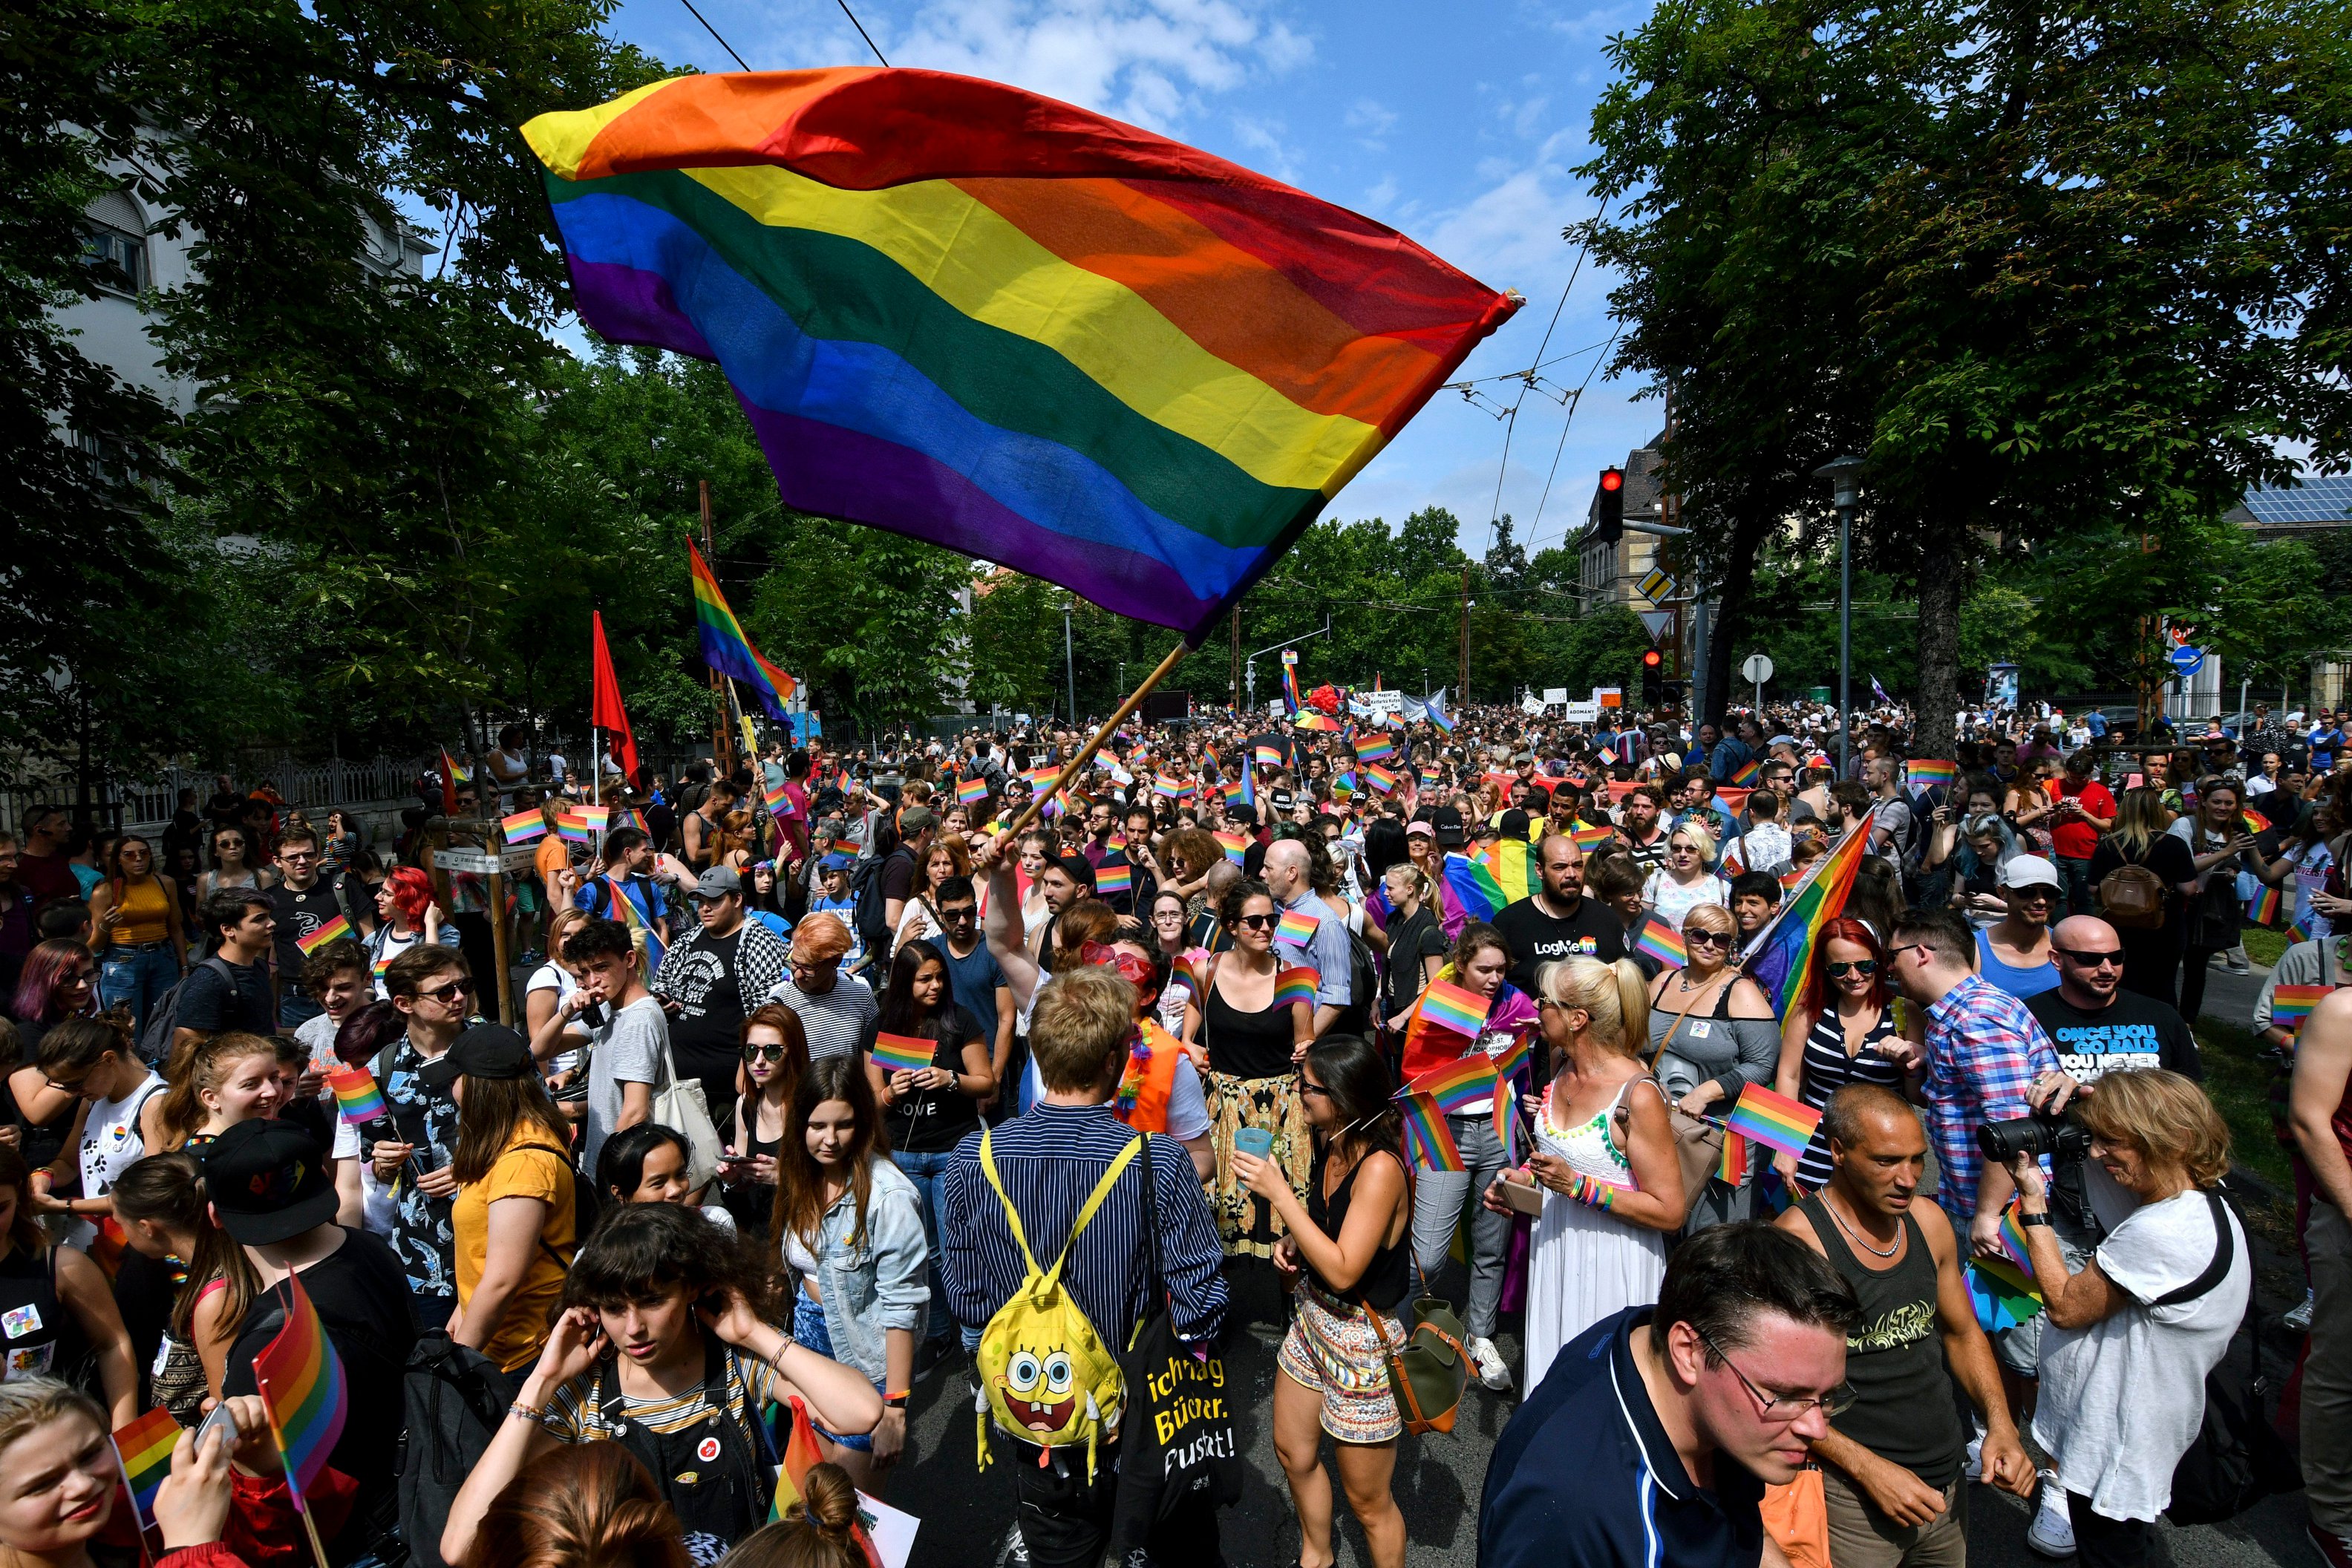 Police Plan To Fence Off Budapest Pride Parade